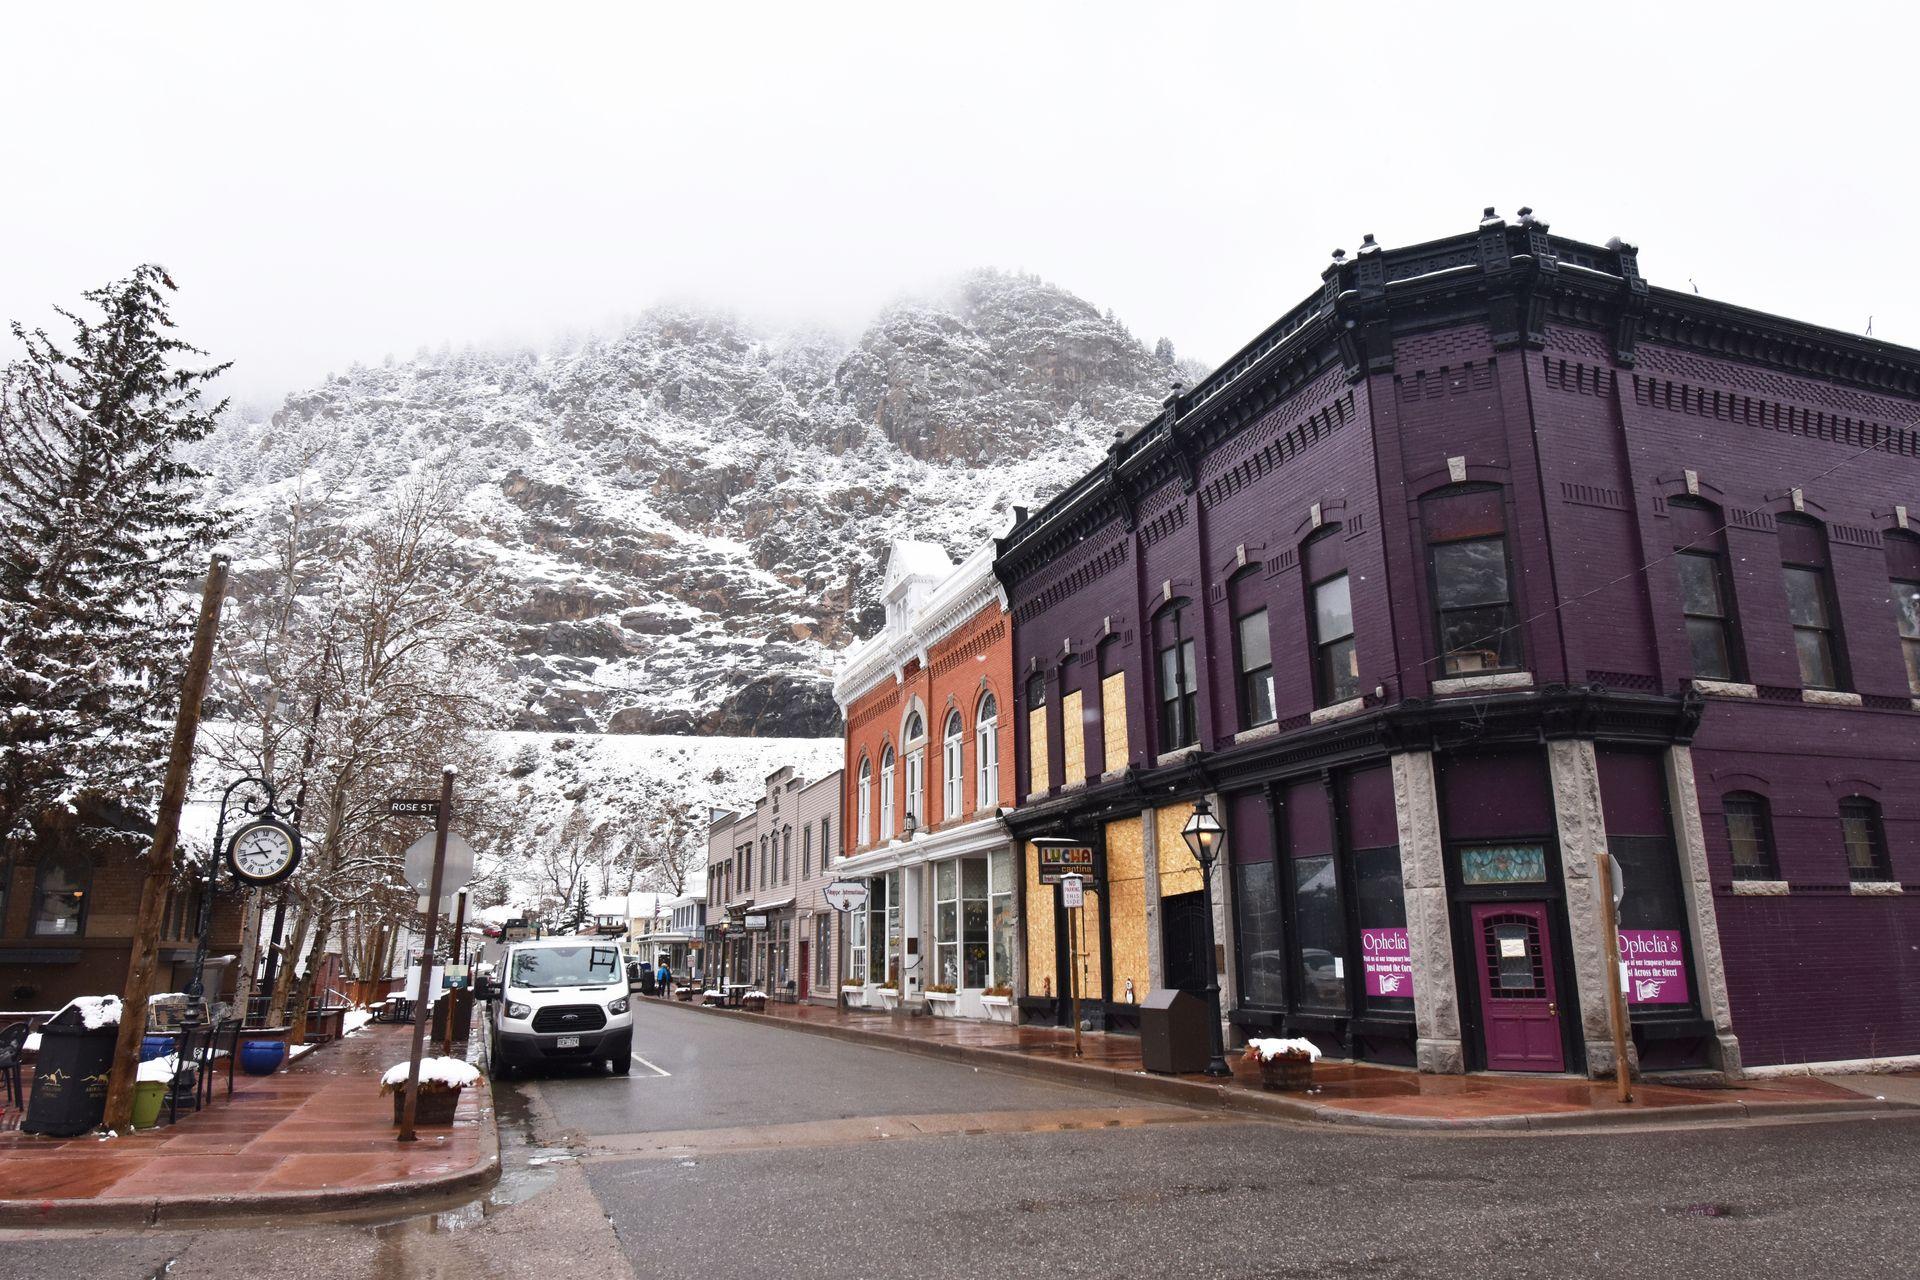 A purple building on a street corner in Georgetown. There are snow covered mountains in the background.